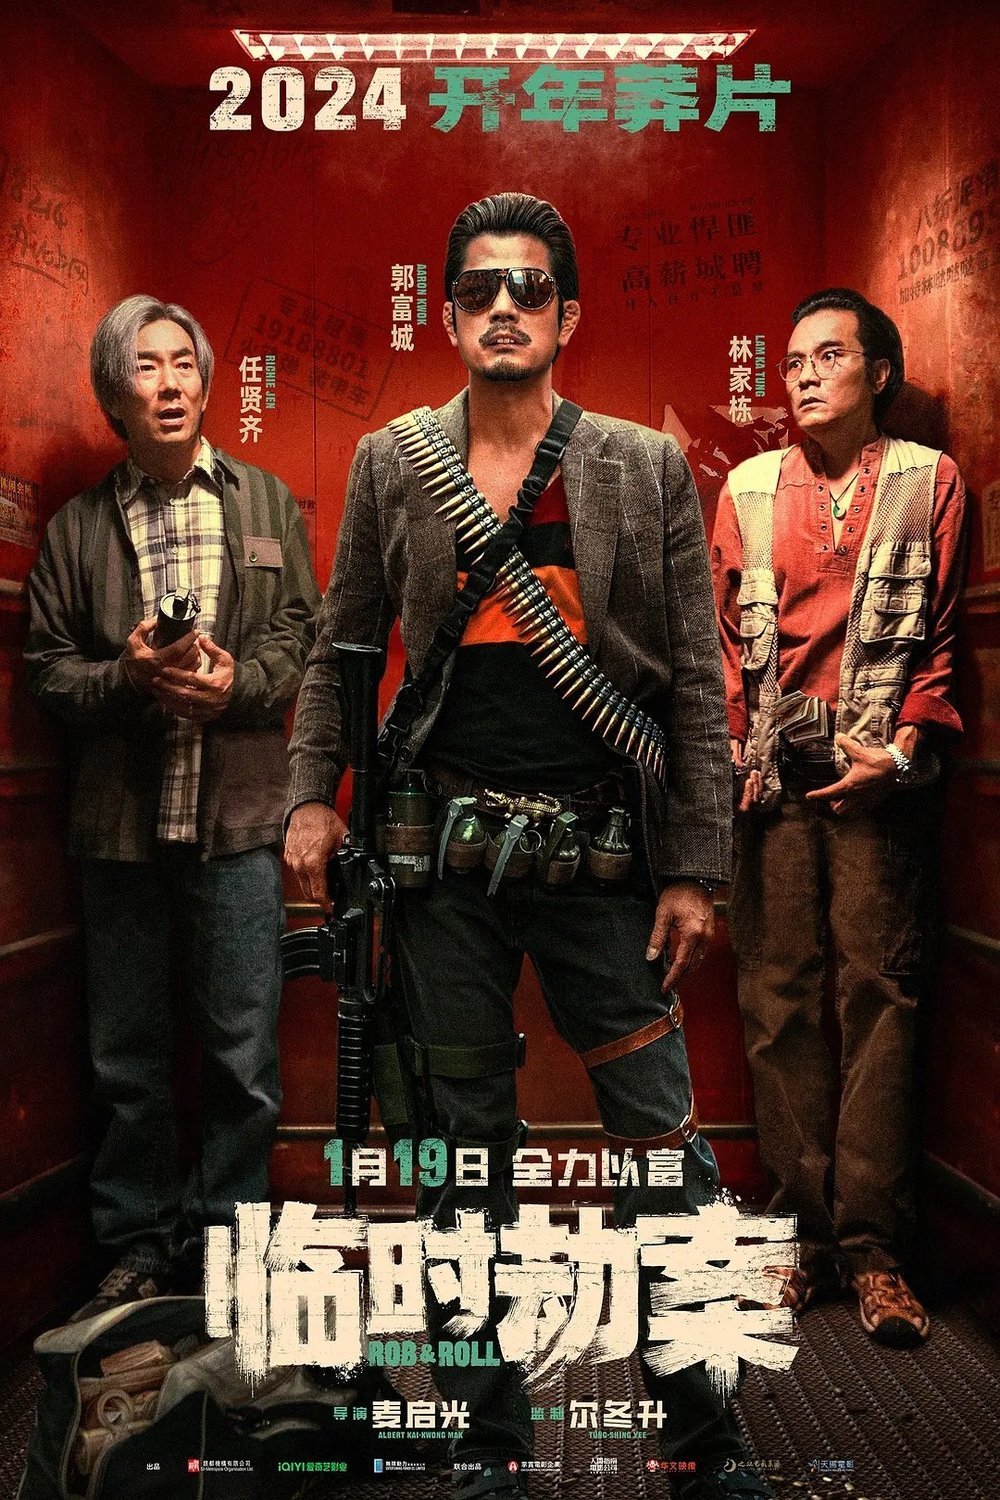 Cantonese poster of the movie Rob N Roll